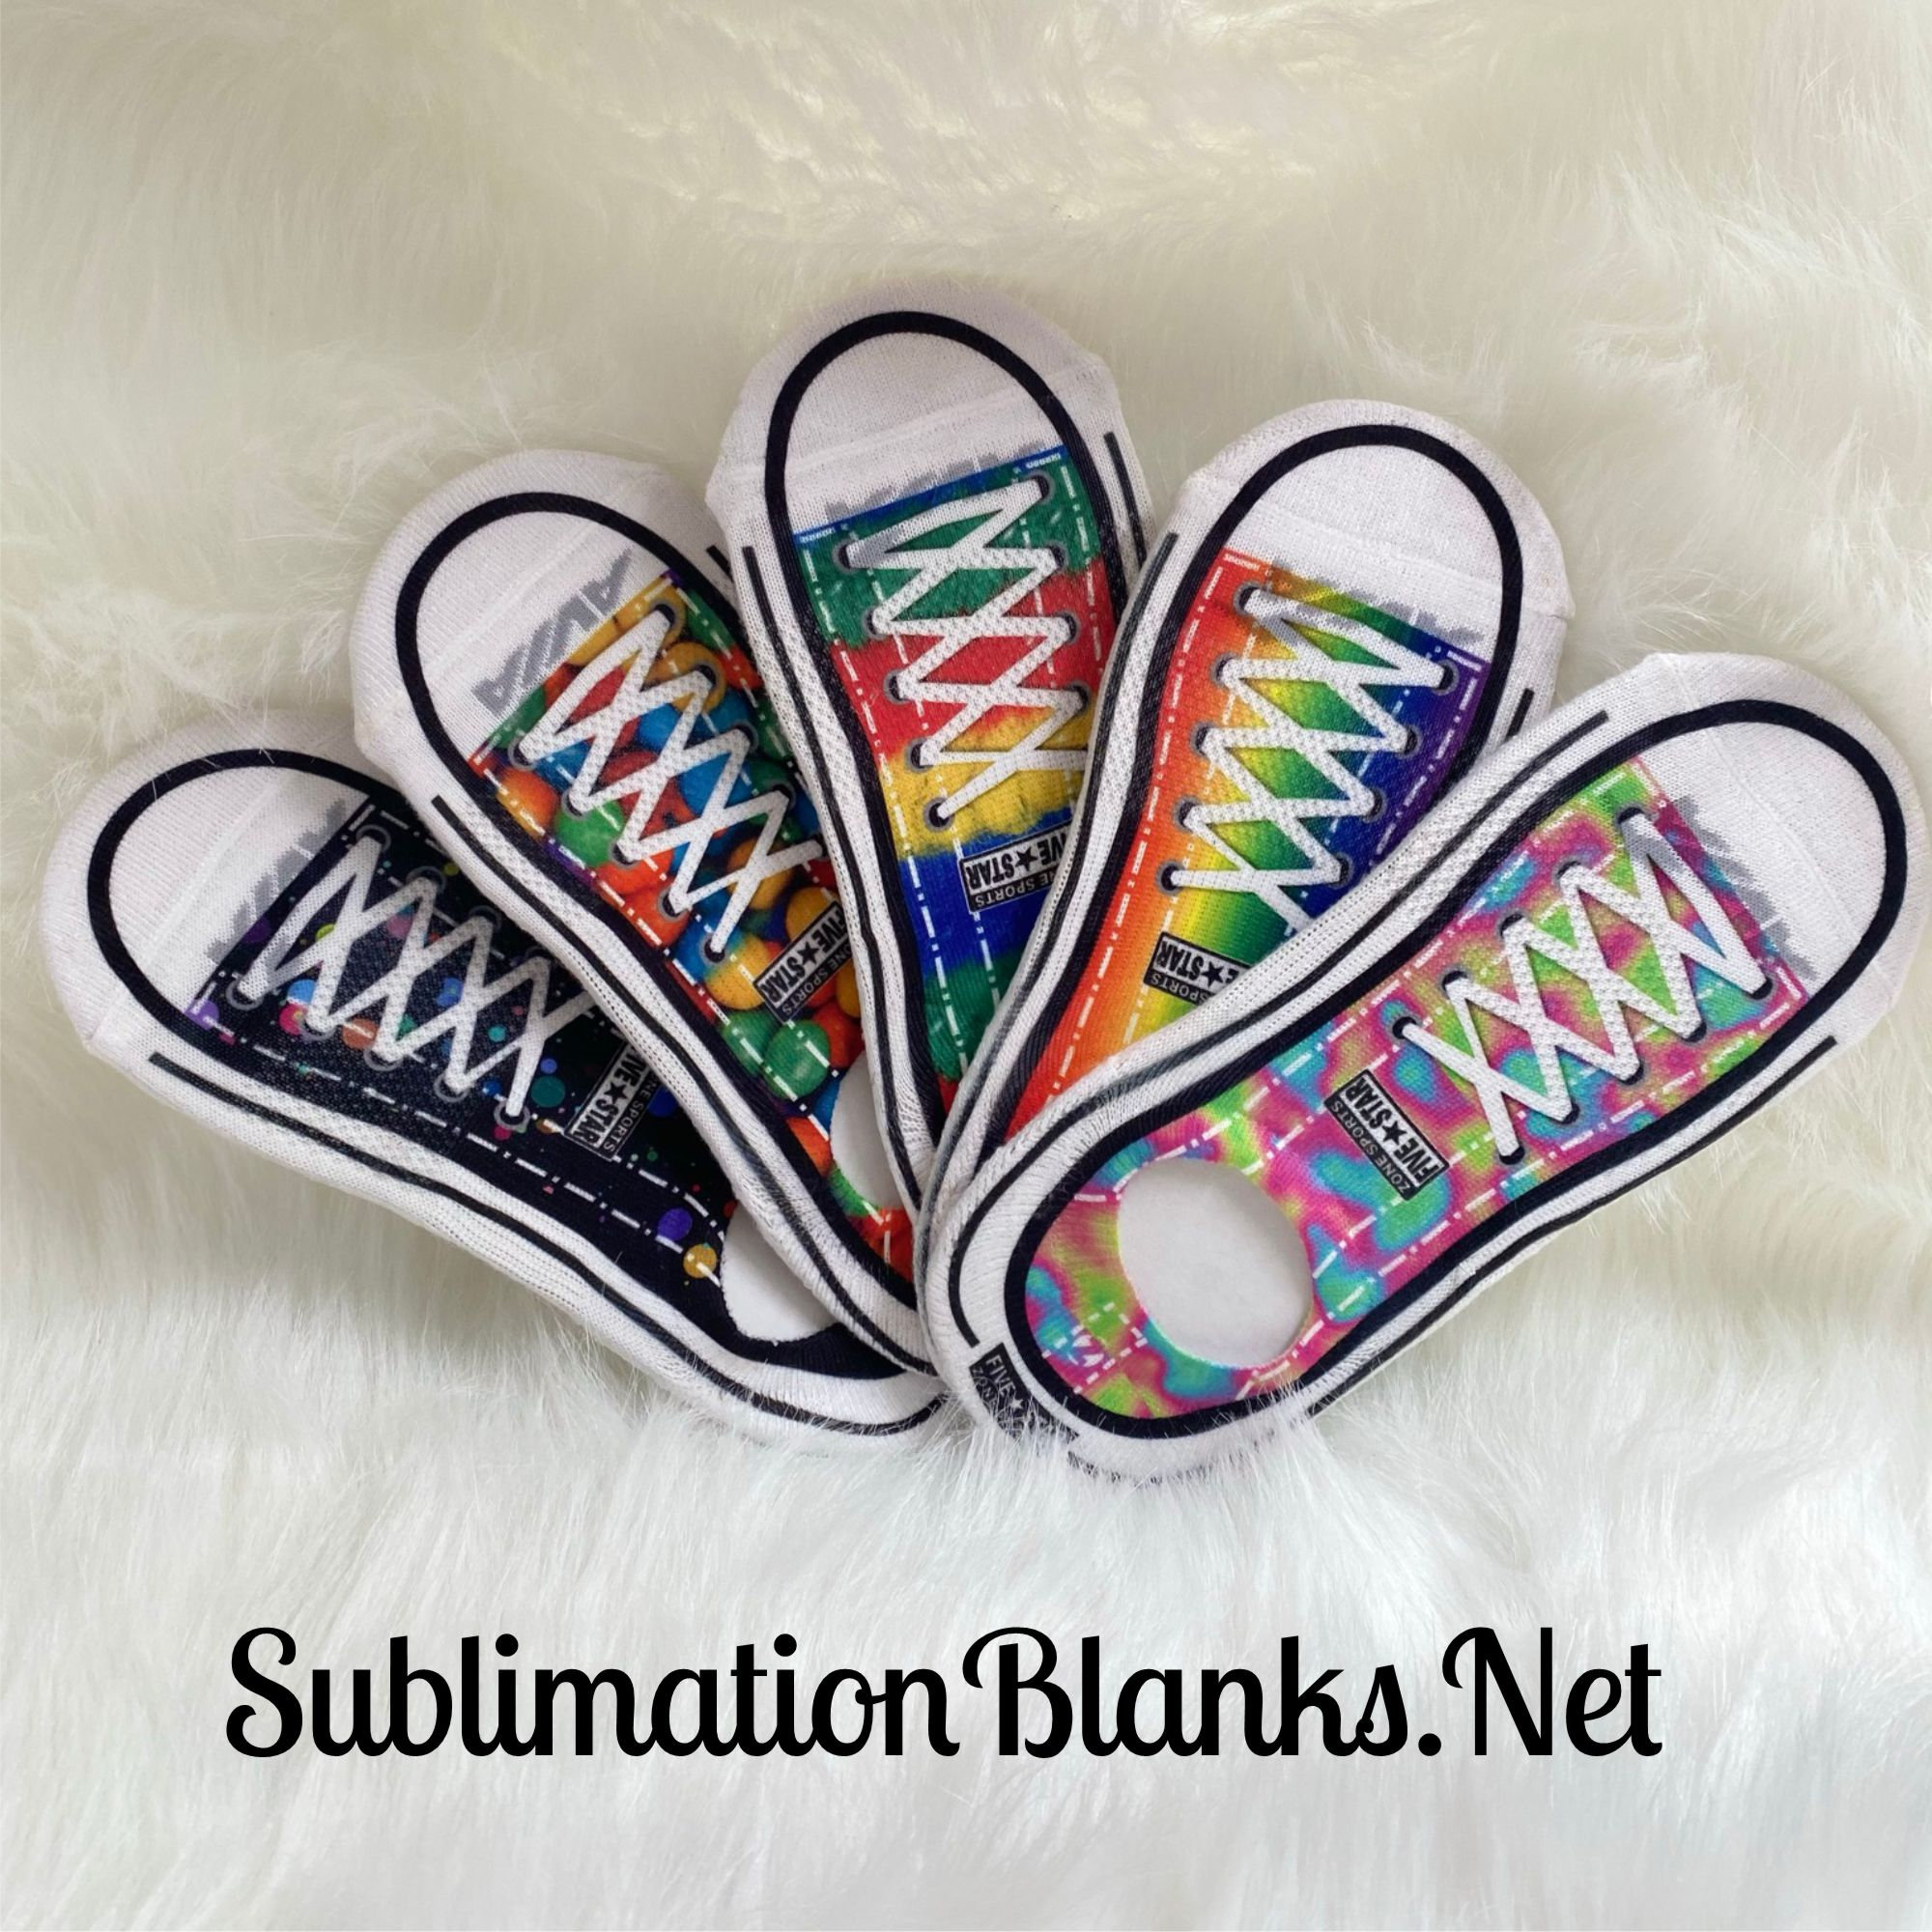 Sock Sublimation Template